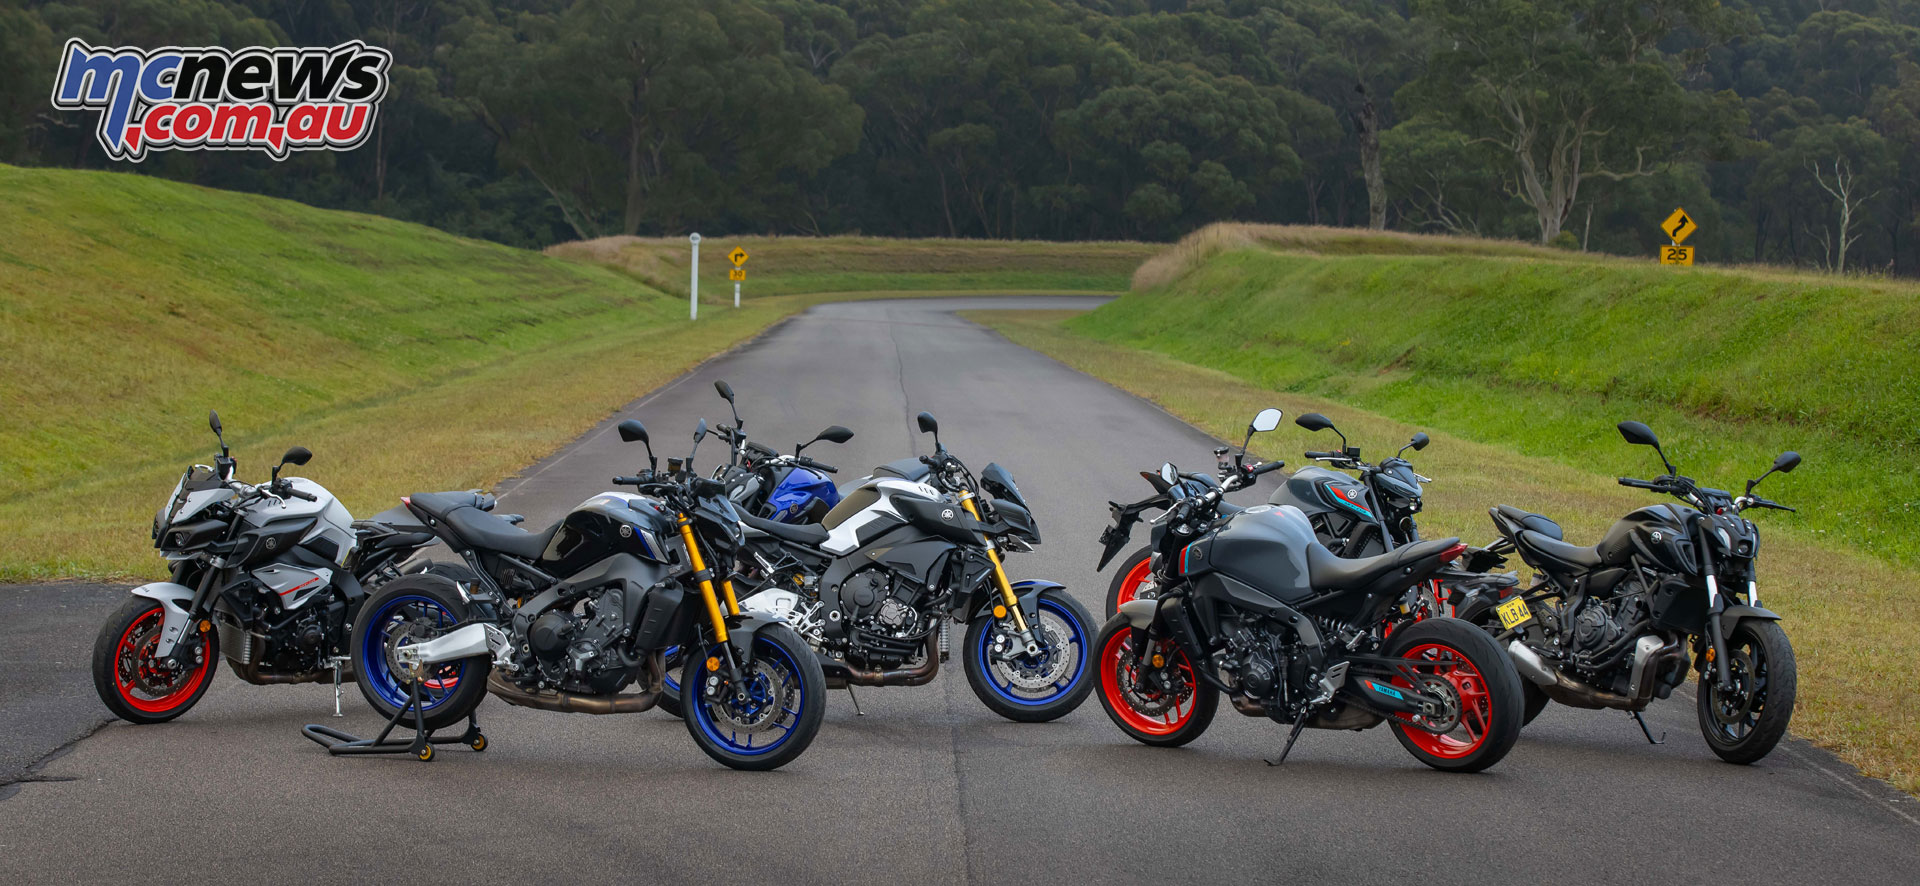 Yamaha MT-09 Gets Displacement And Power Boost For 2021